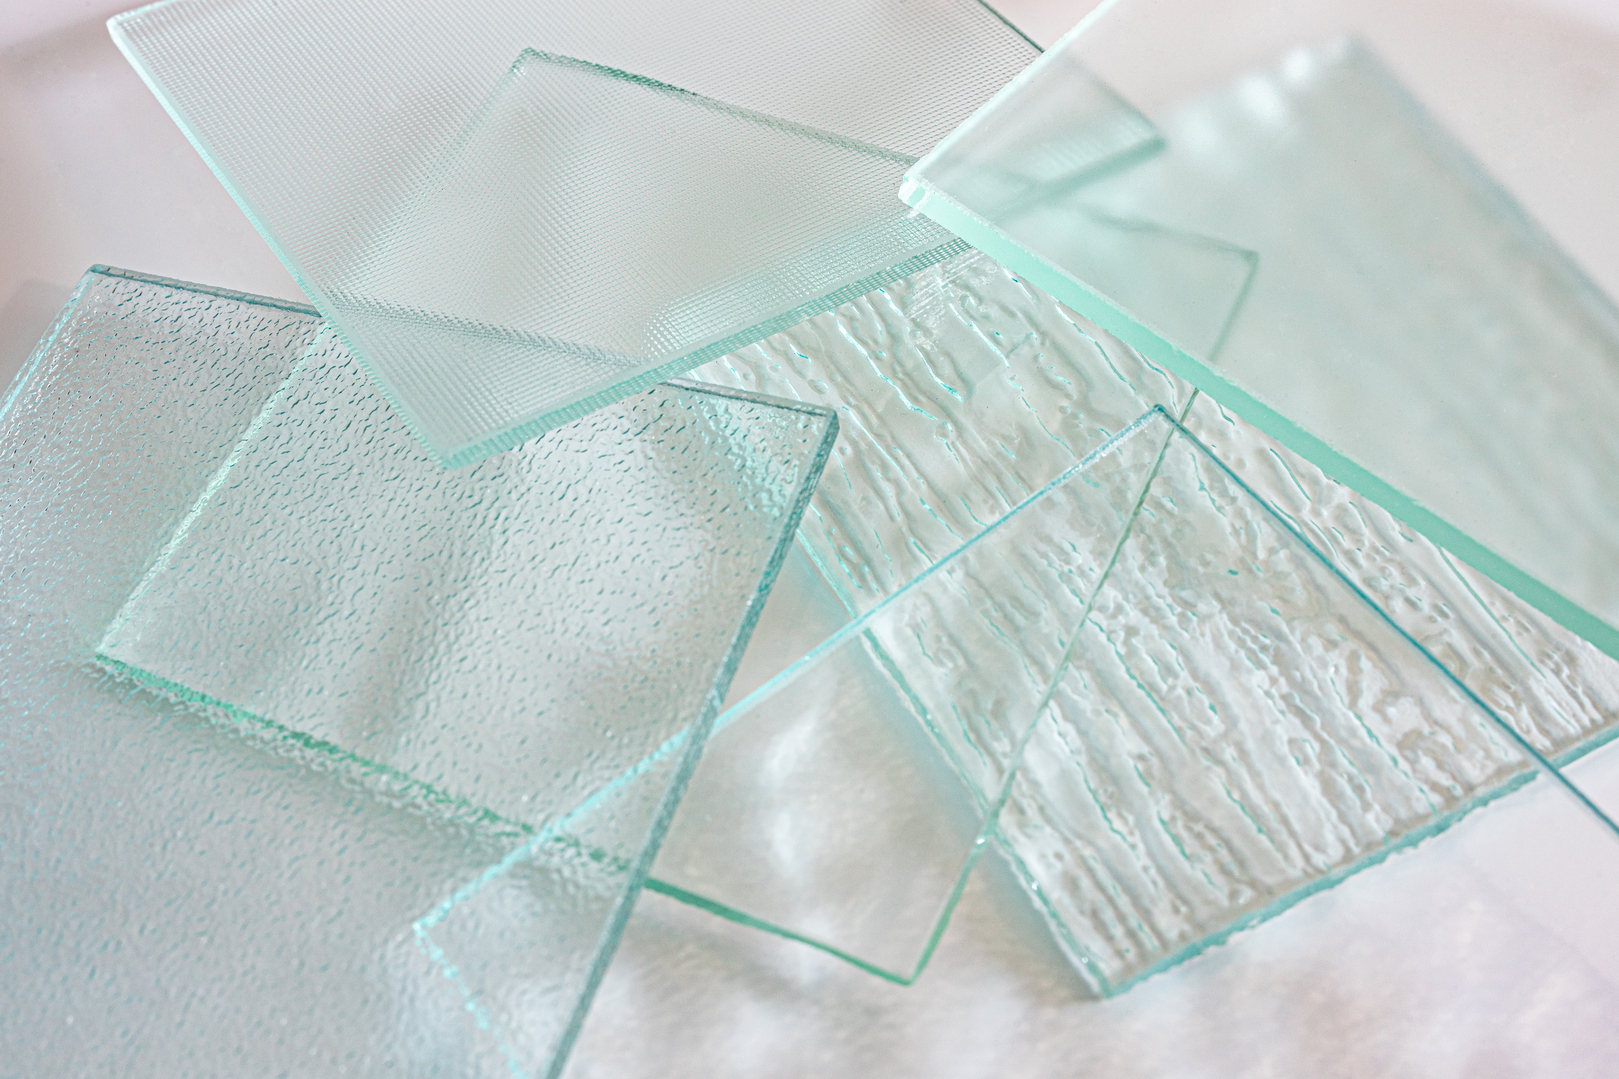 Patterened Glass Screens